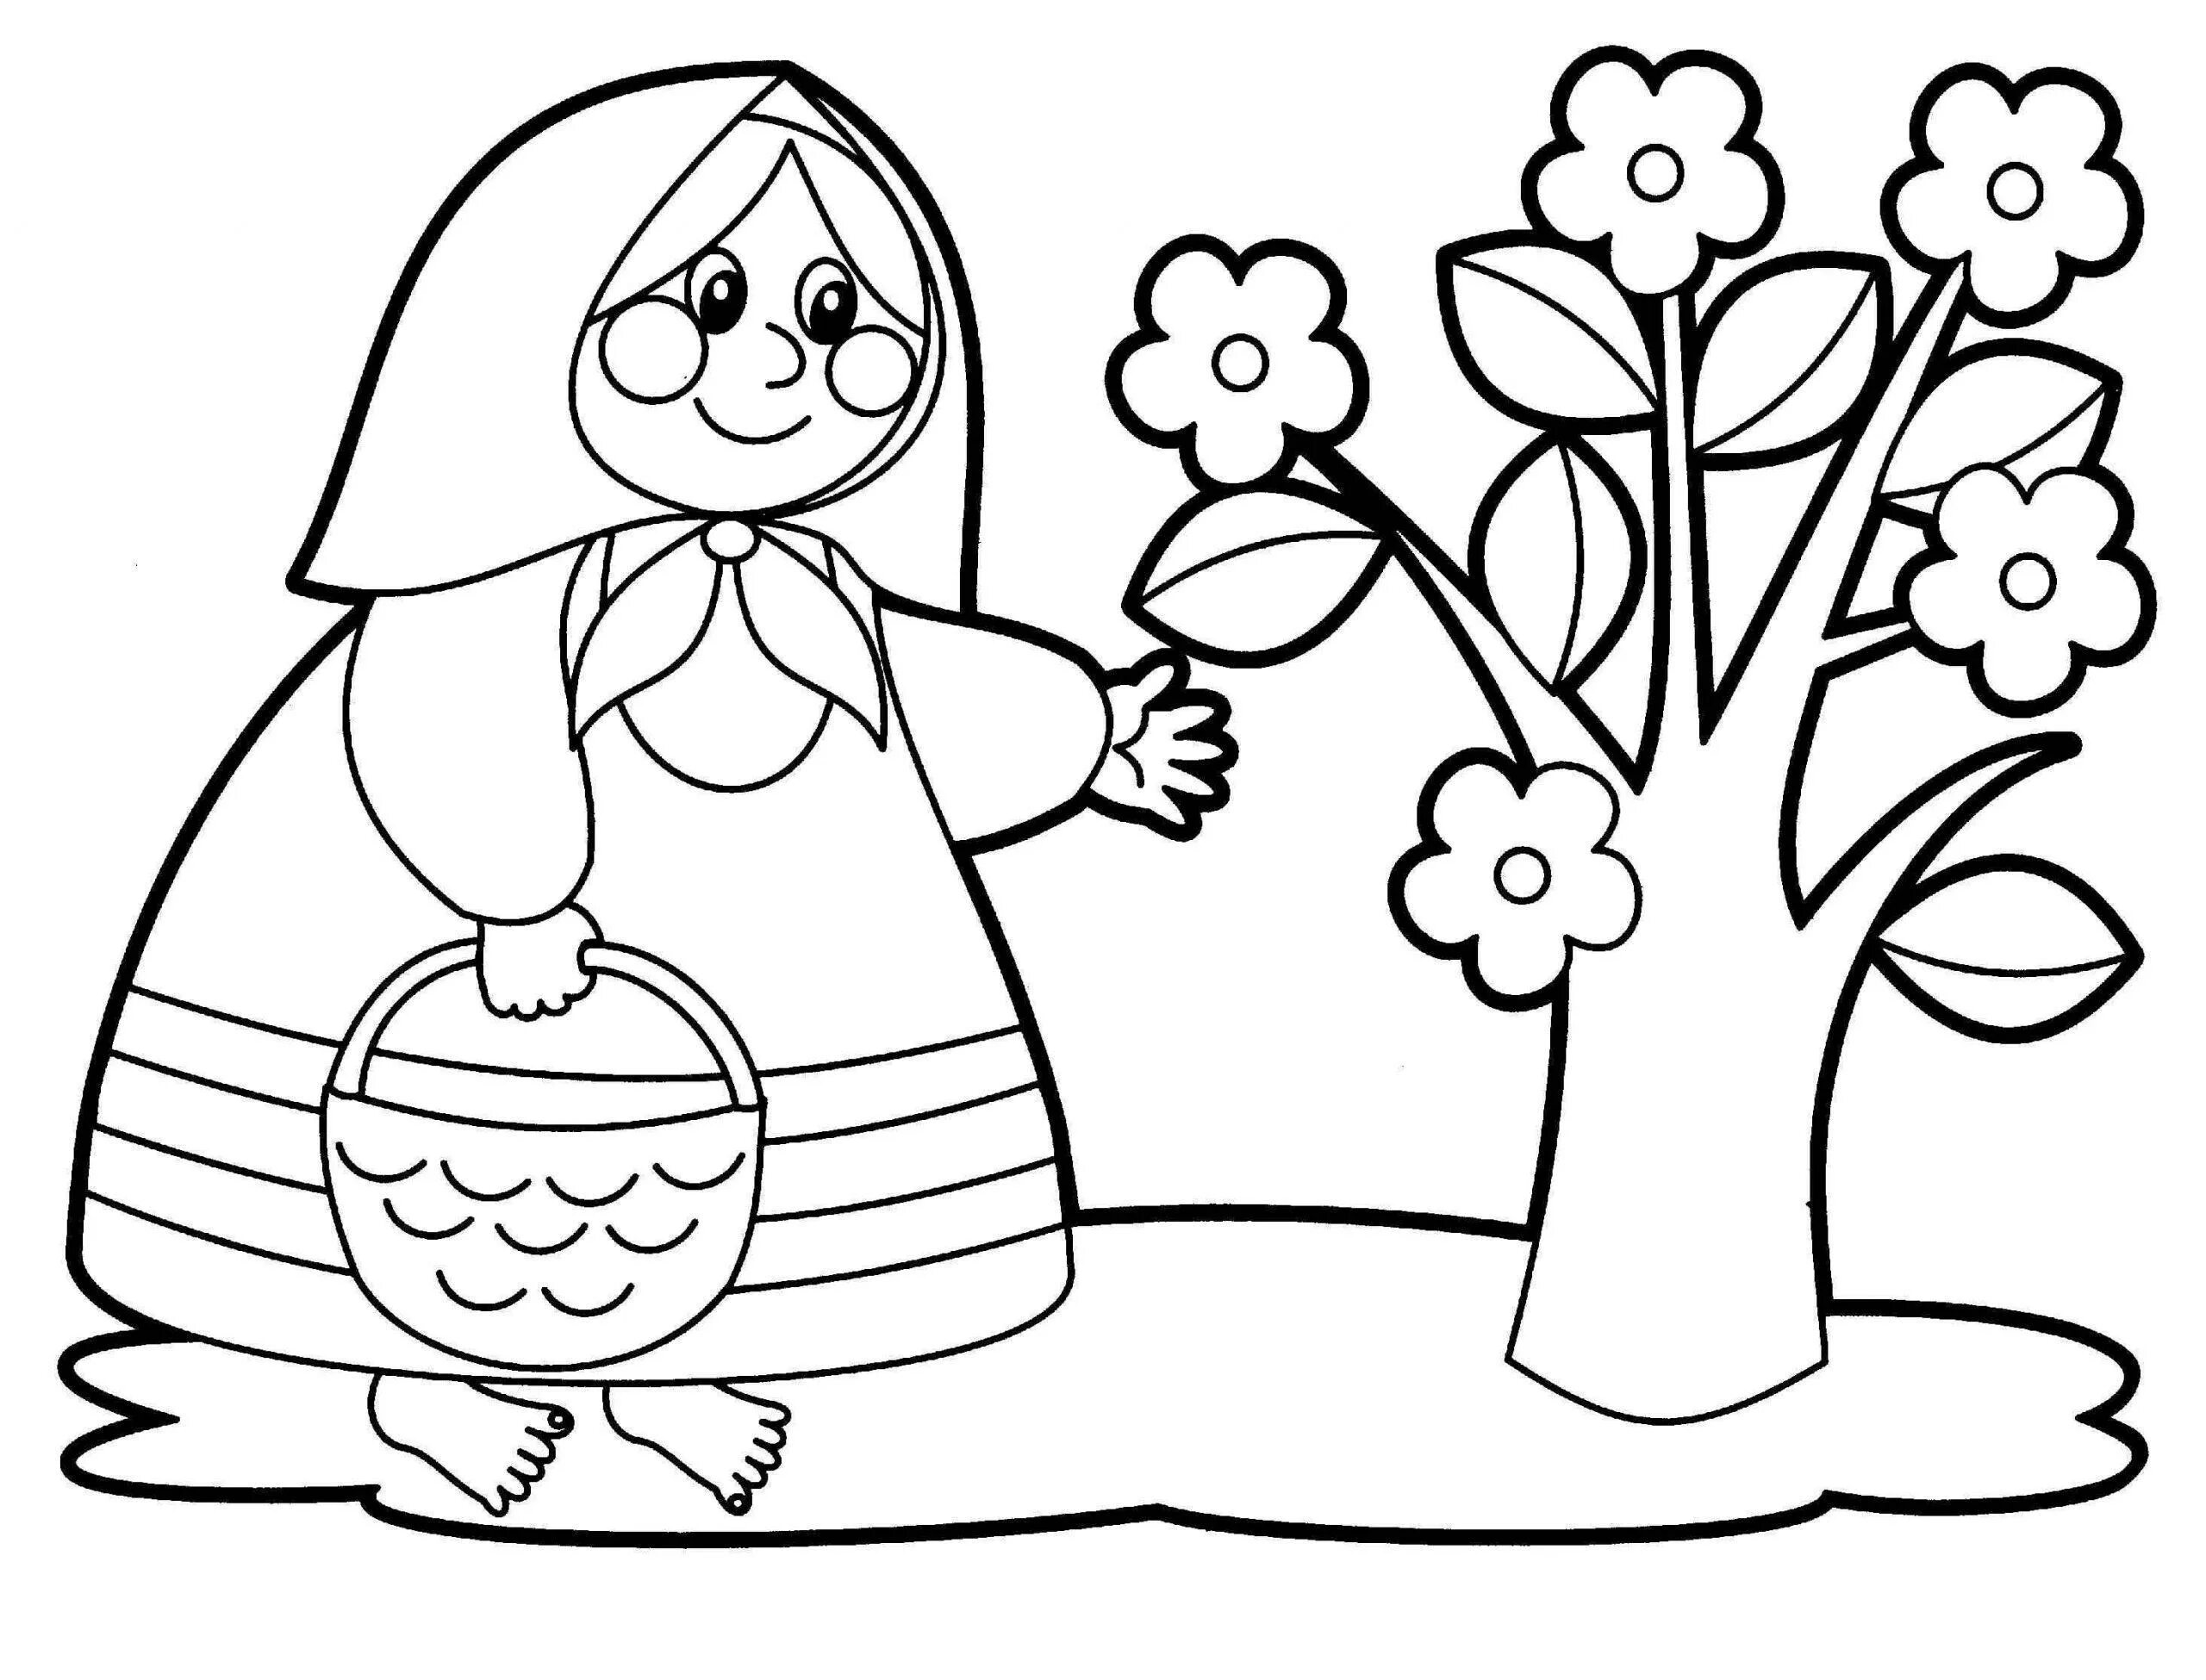 Vibrant printable coloring pages for kids